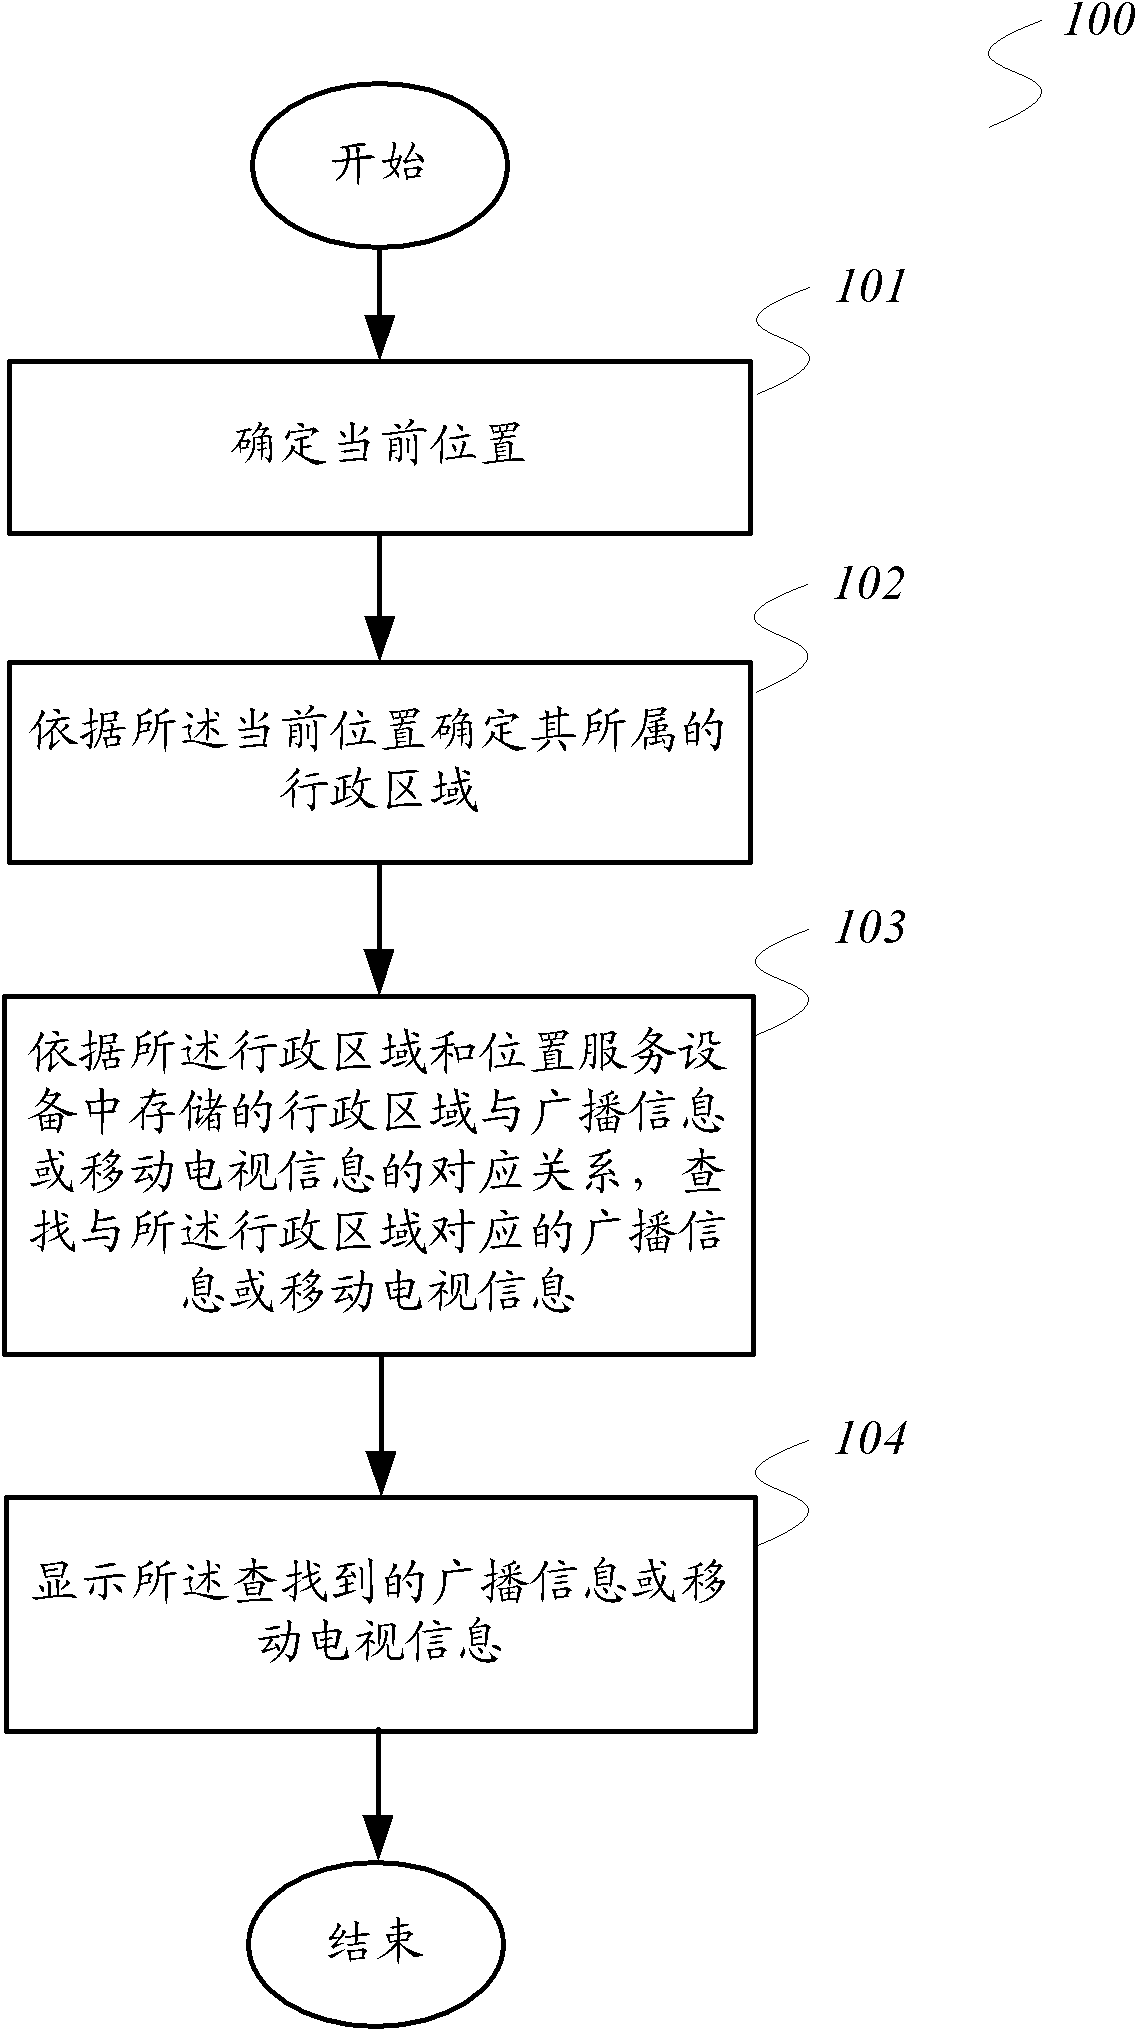 Method for displaying and regulating broadcast information or mobile television information as well as position service equipment